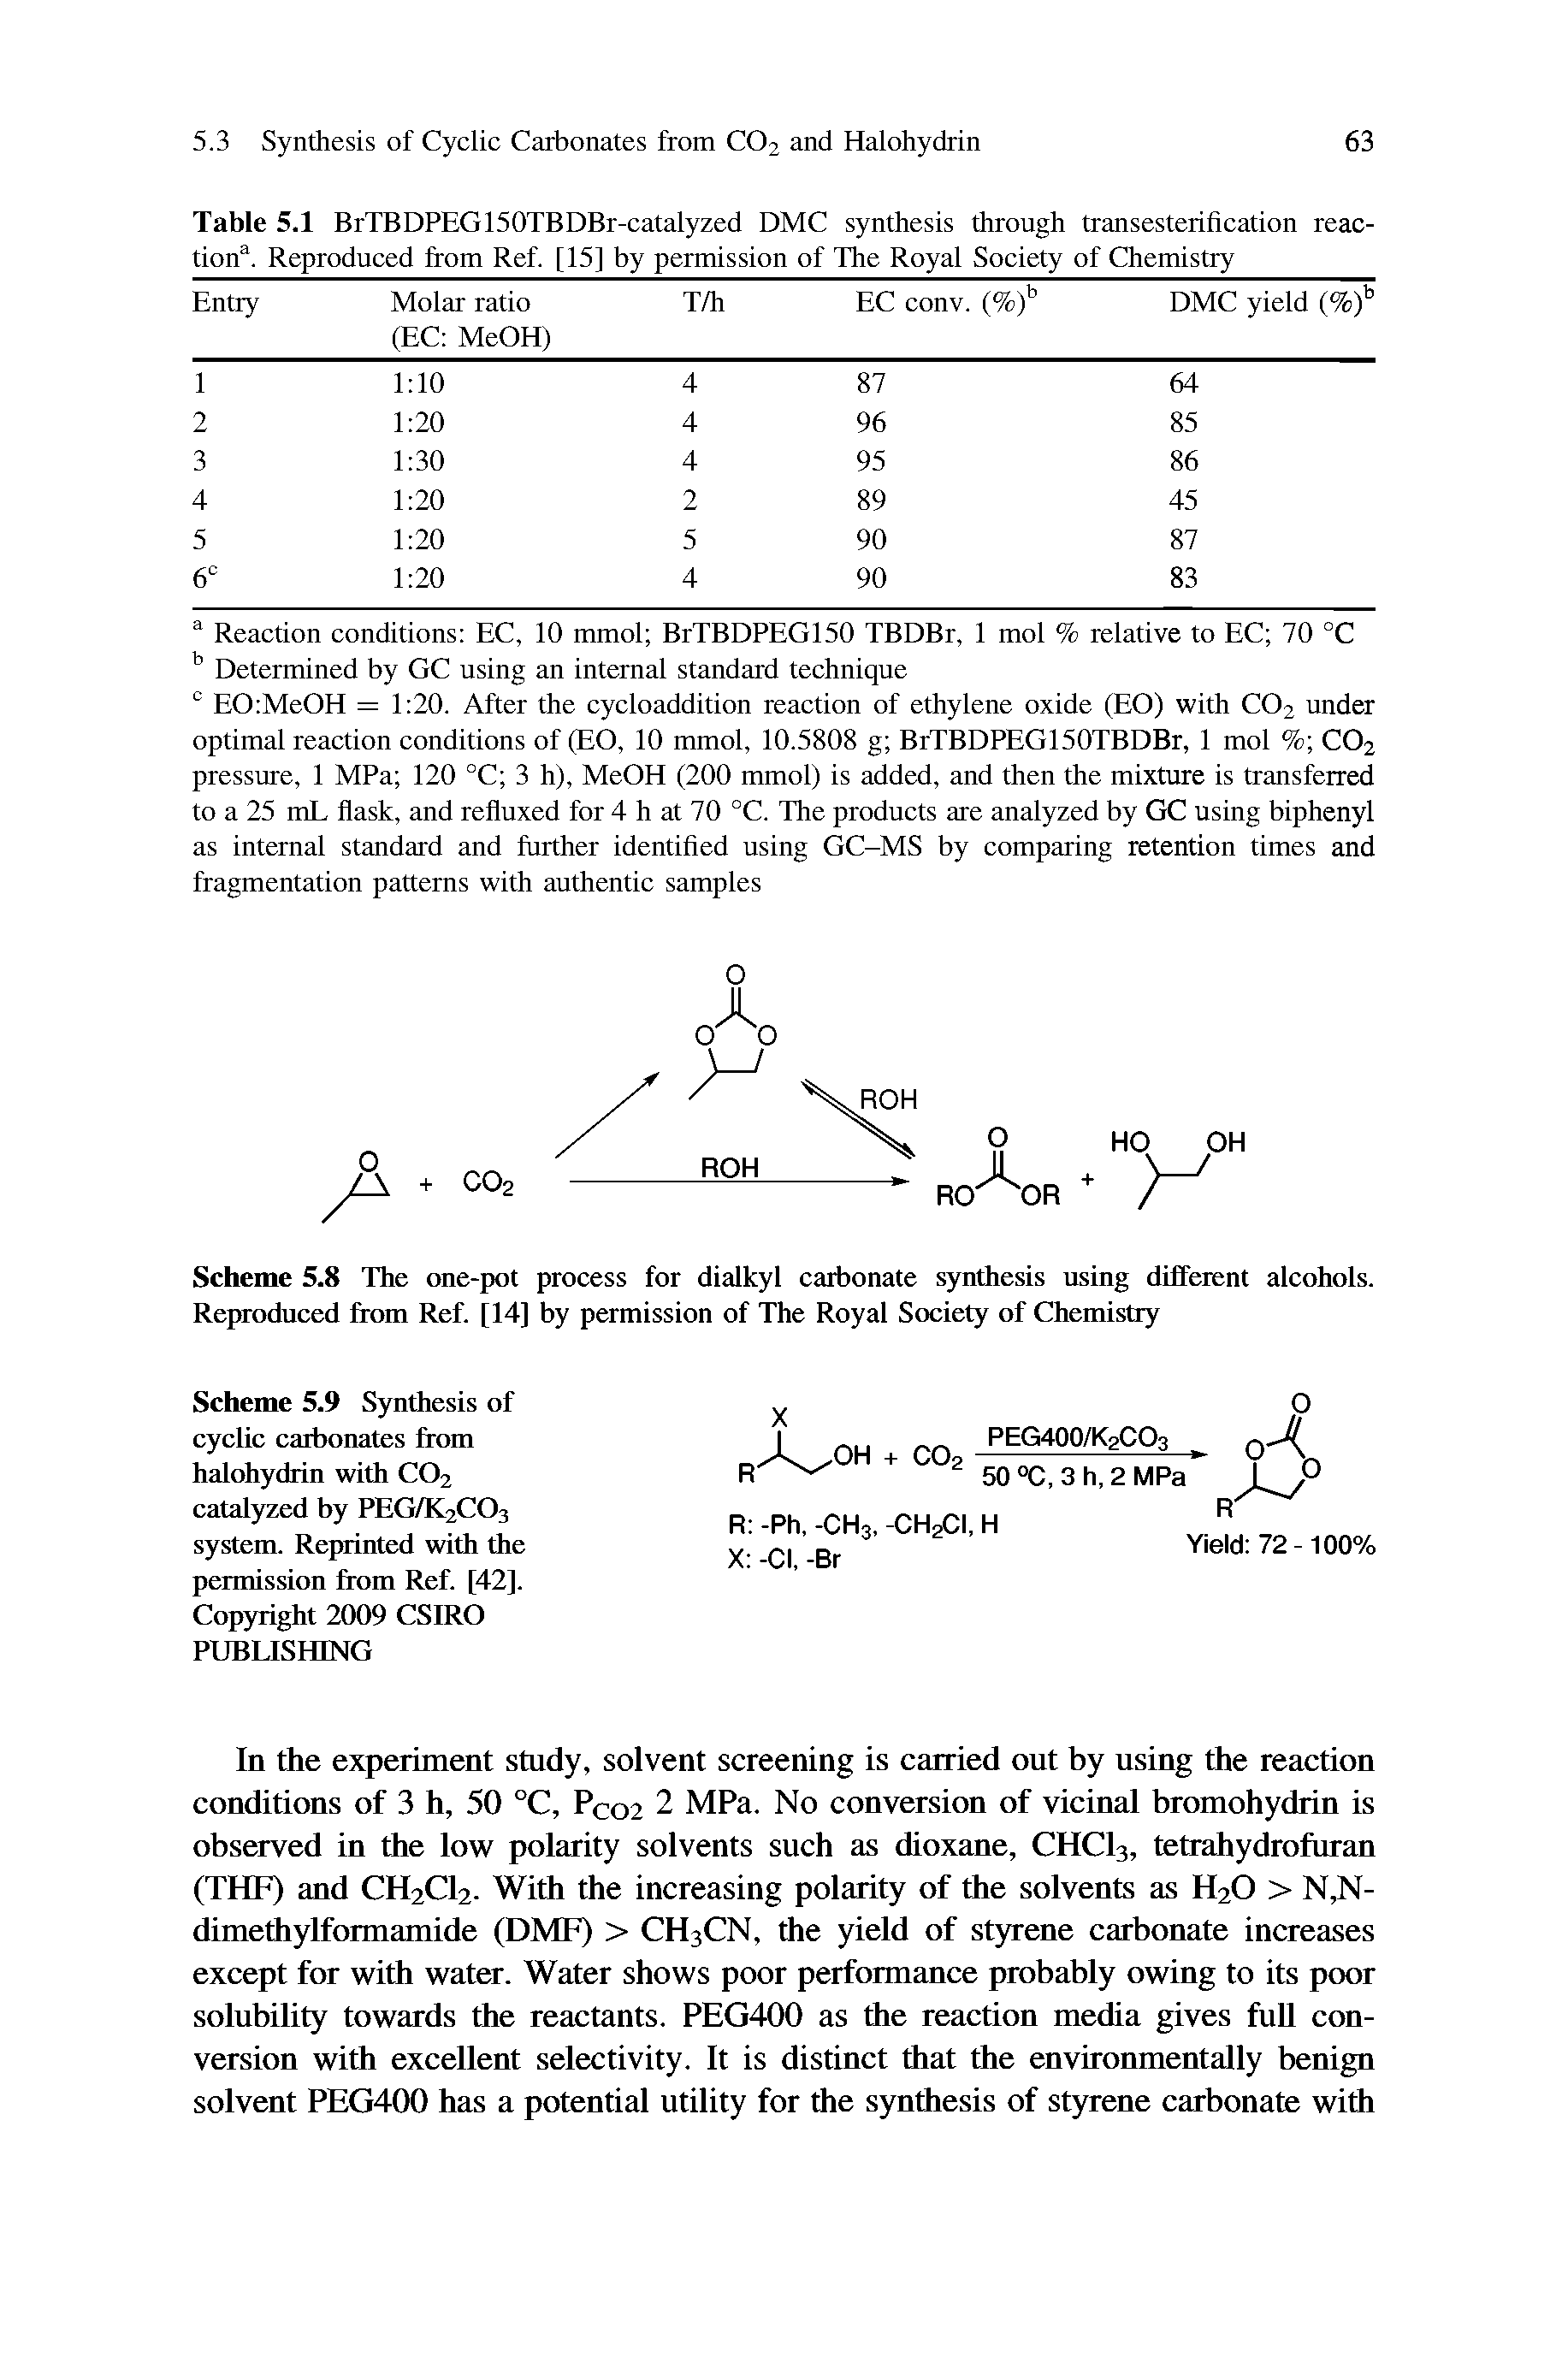 Scheme 5.9 Synthesis of cyclic carbonates from halohydrin with C02 catalyzed by PEG/K2C03 system. Reprinted with the permission from Ref. [42].